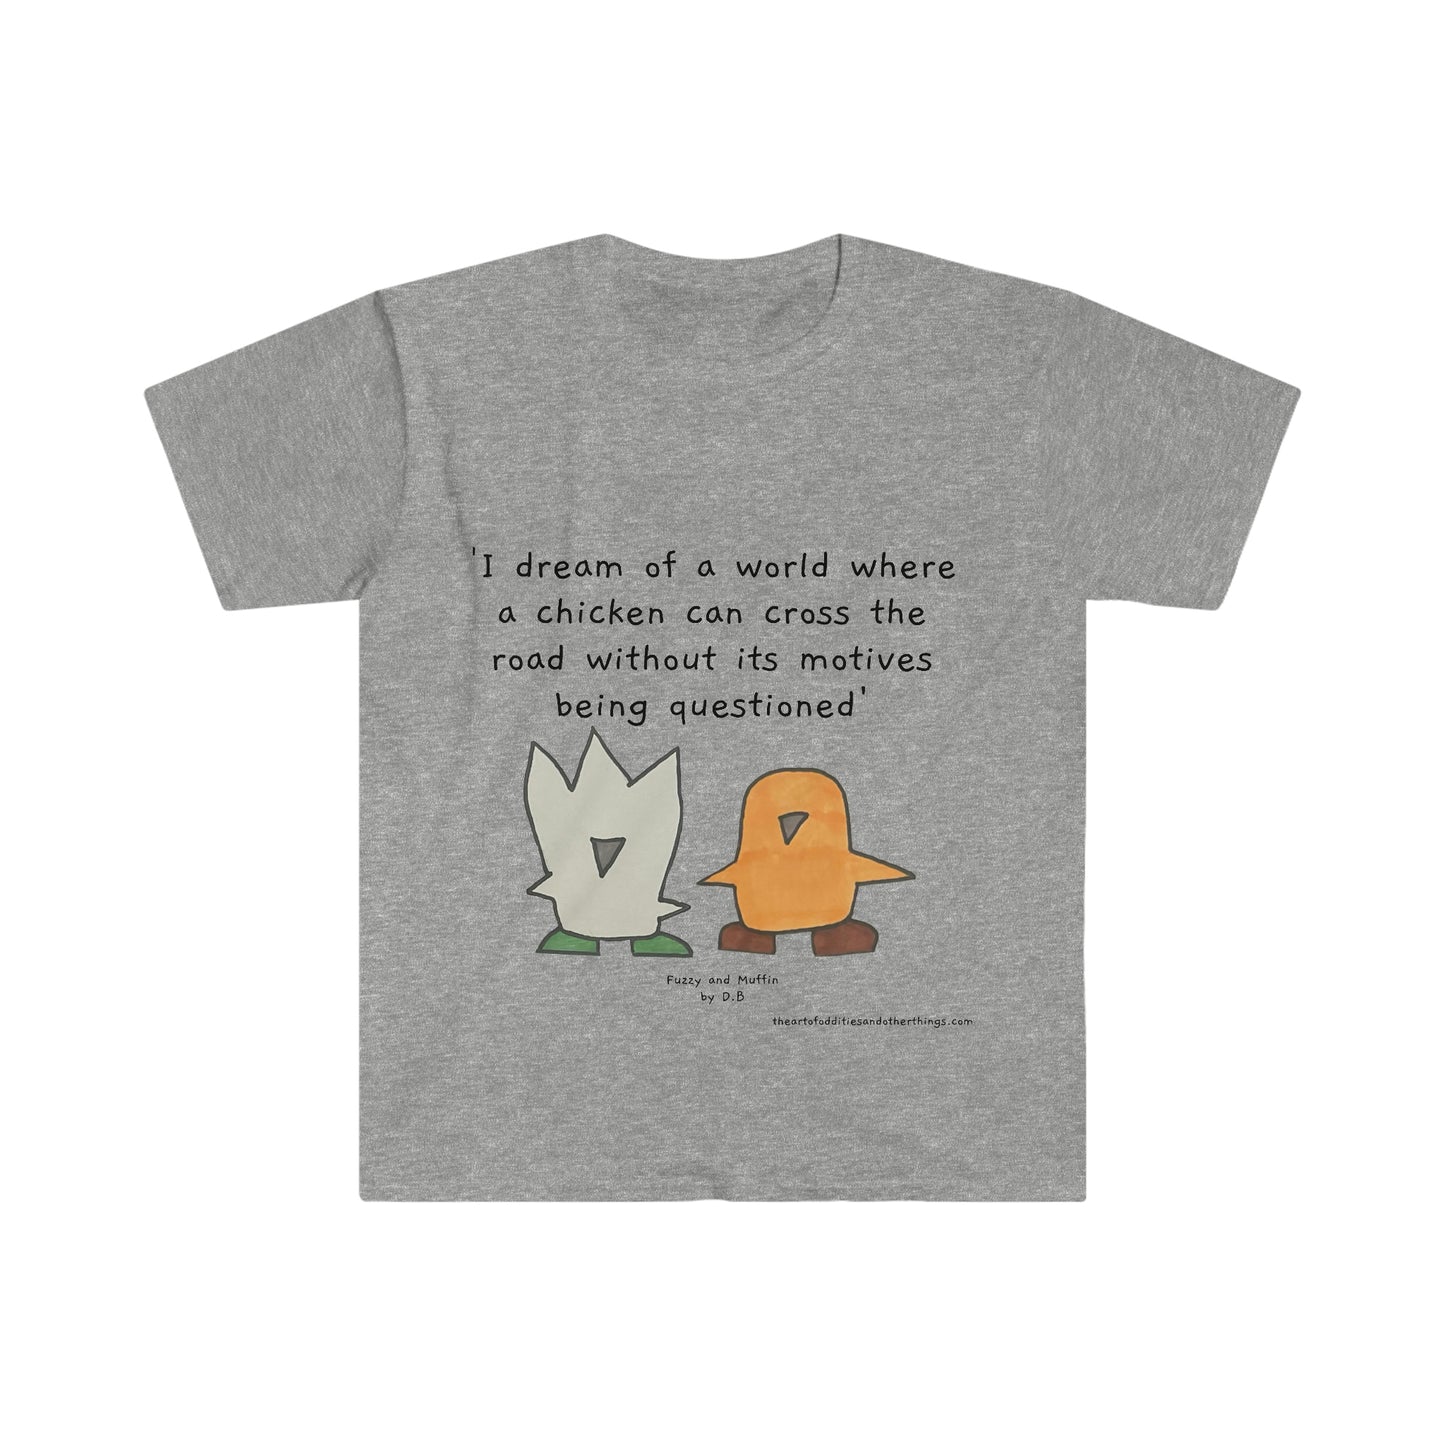 'I dream of a world' featuring Fuzzy and Muffin by D.B. Unisex Softstyle T-Shirt